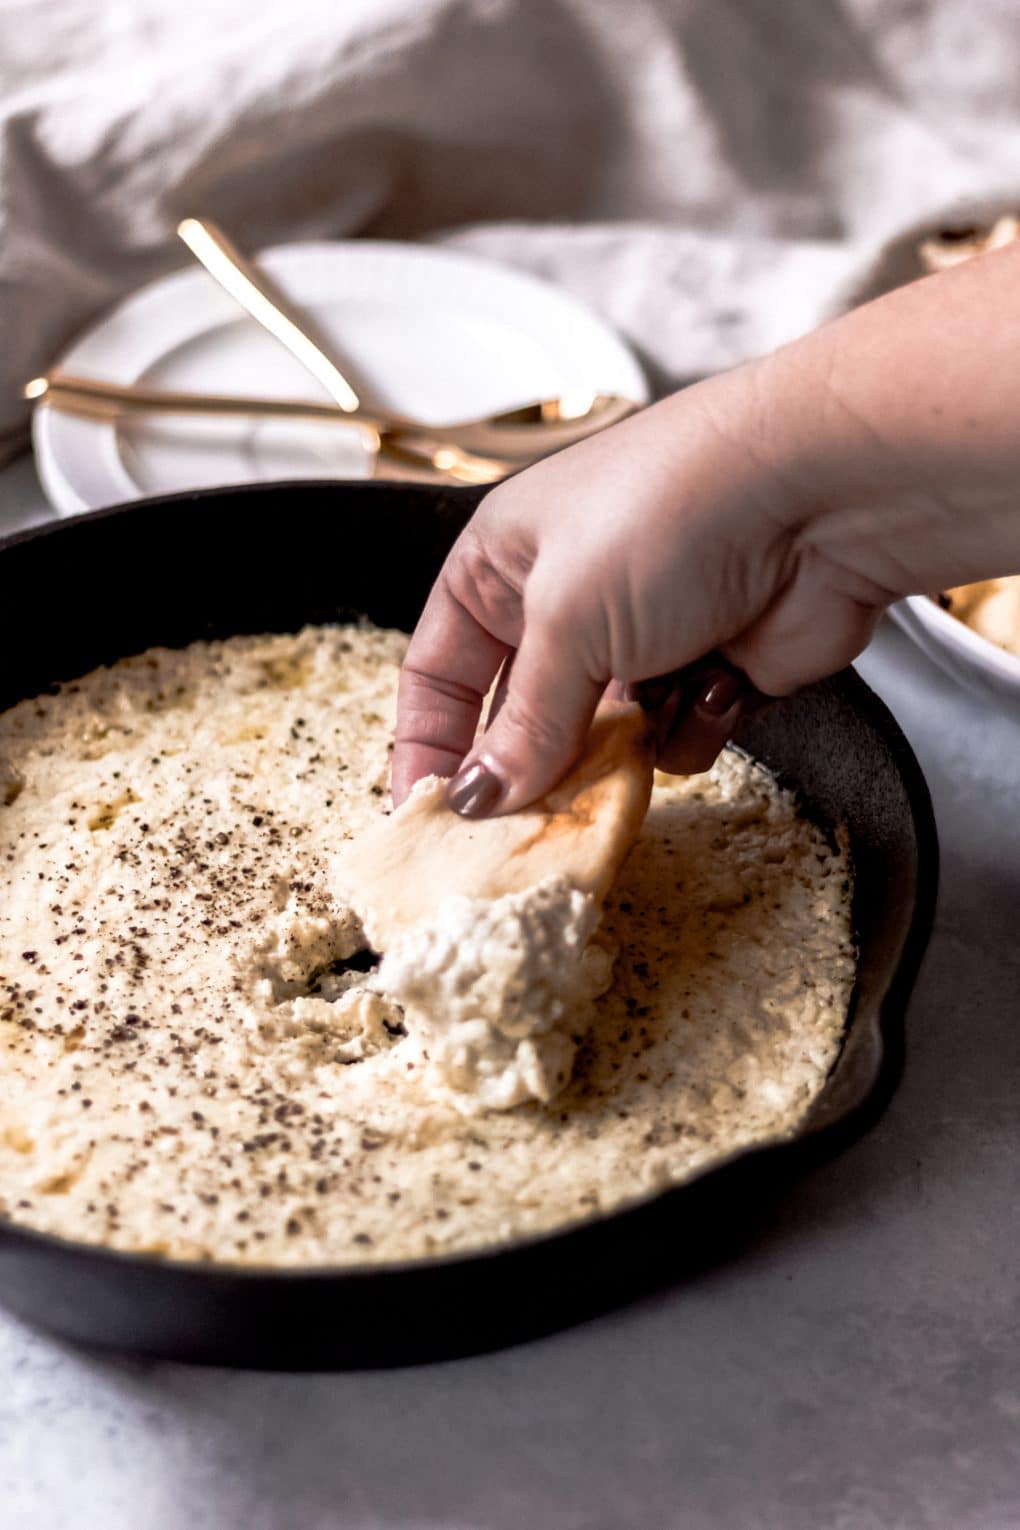 A woman dipping a piece of pita bread into a cast iron skillet of baked ricotta dip There are two white plates and two gold forks in the background and a neutral-colored towel.